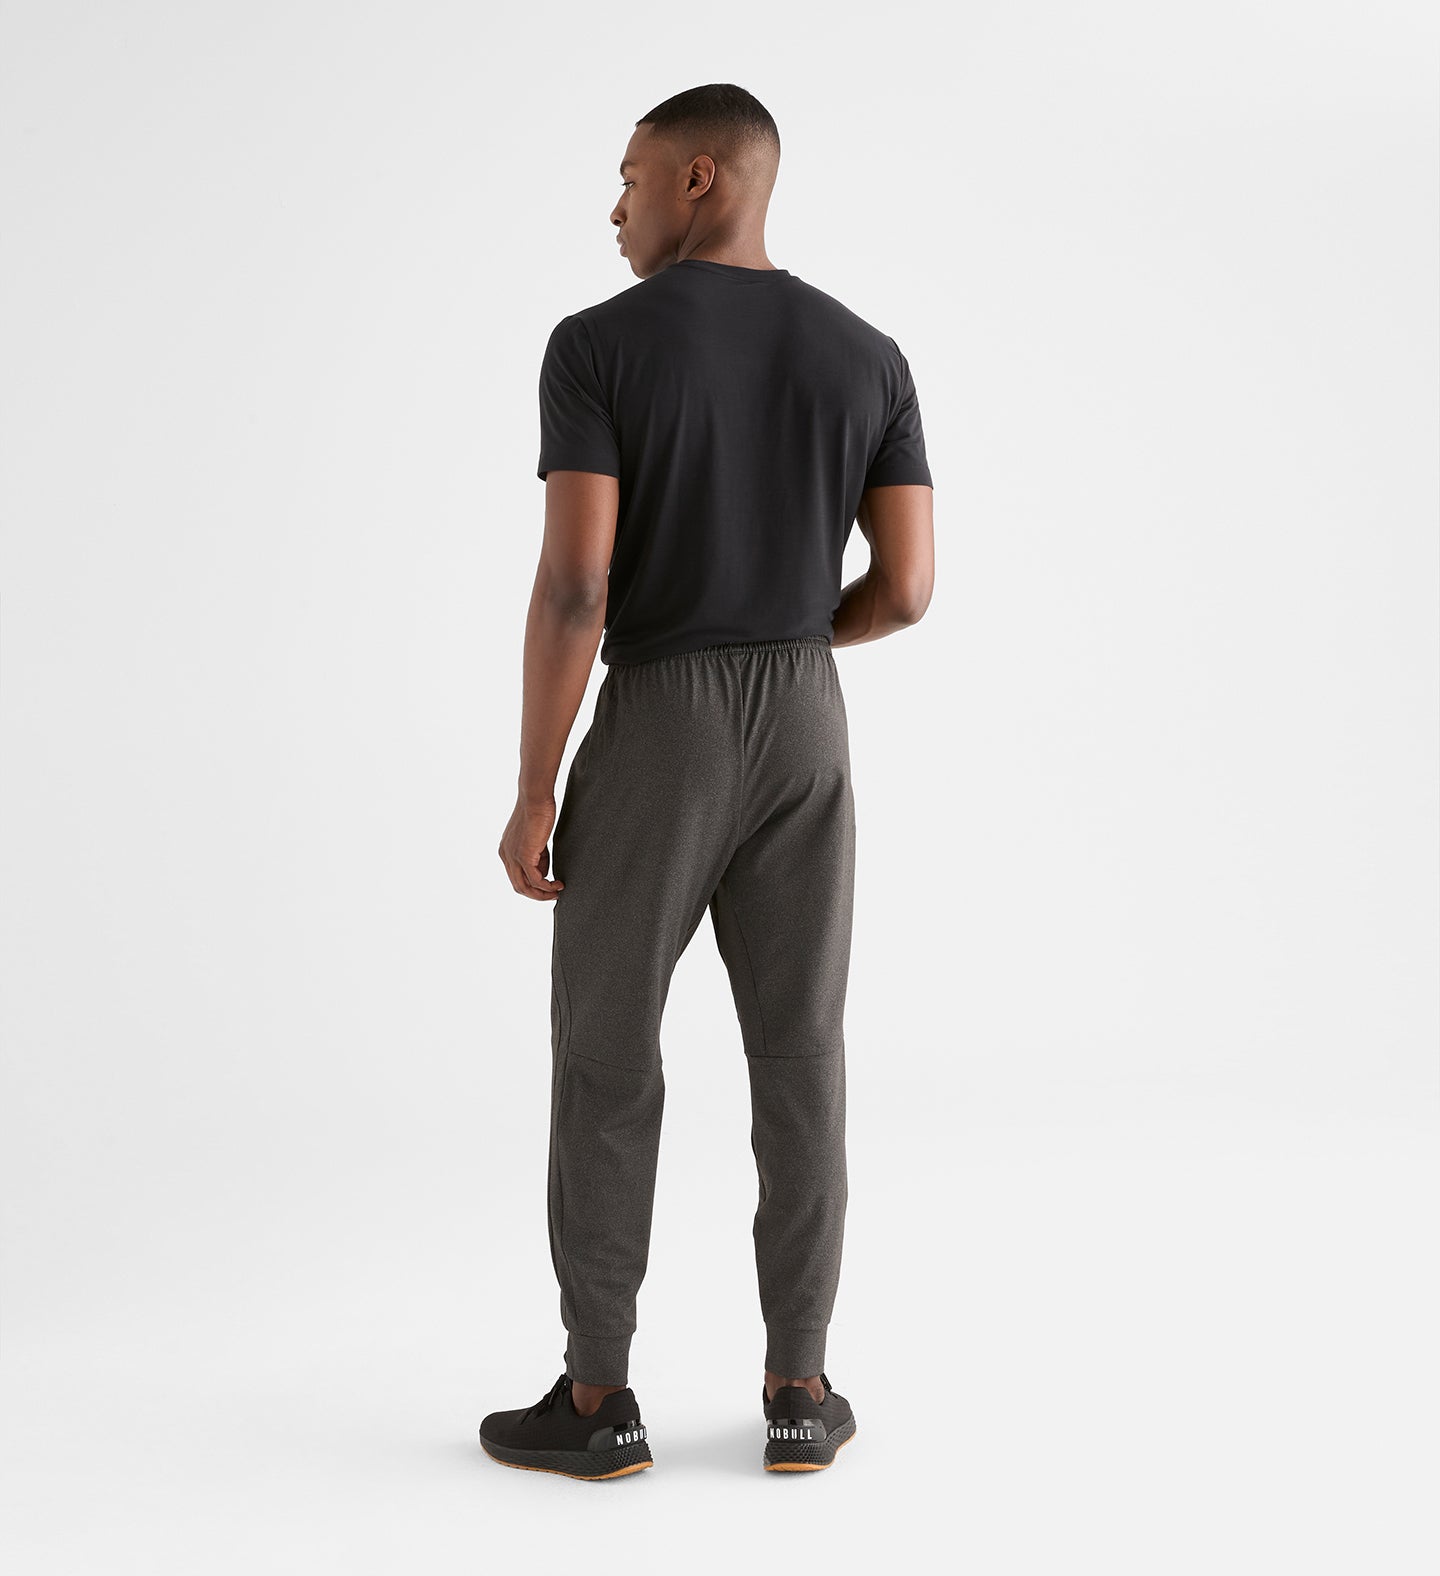 How To Wear Joggers For Men